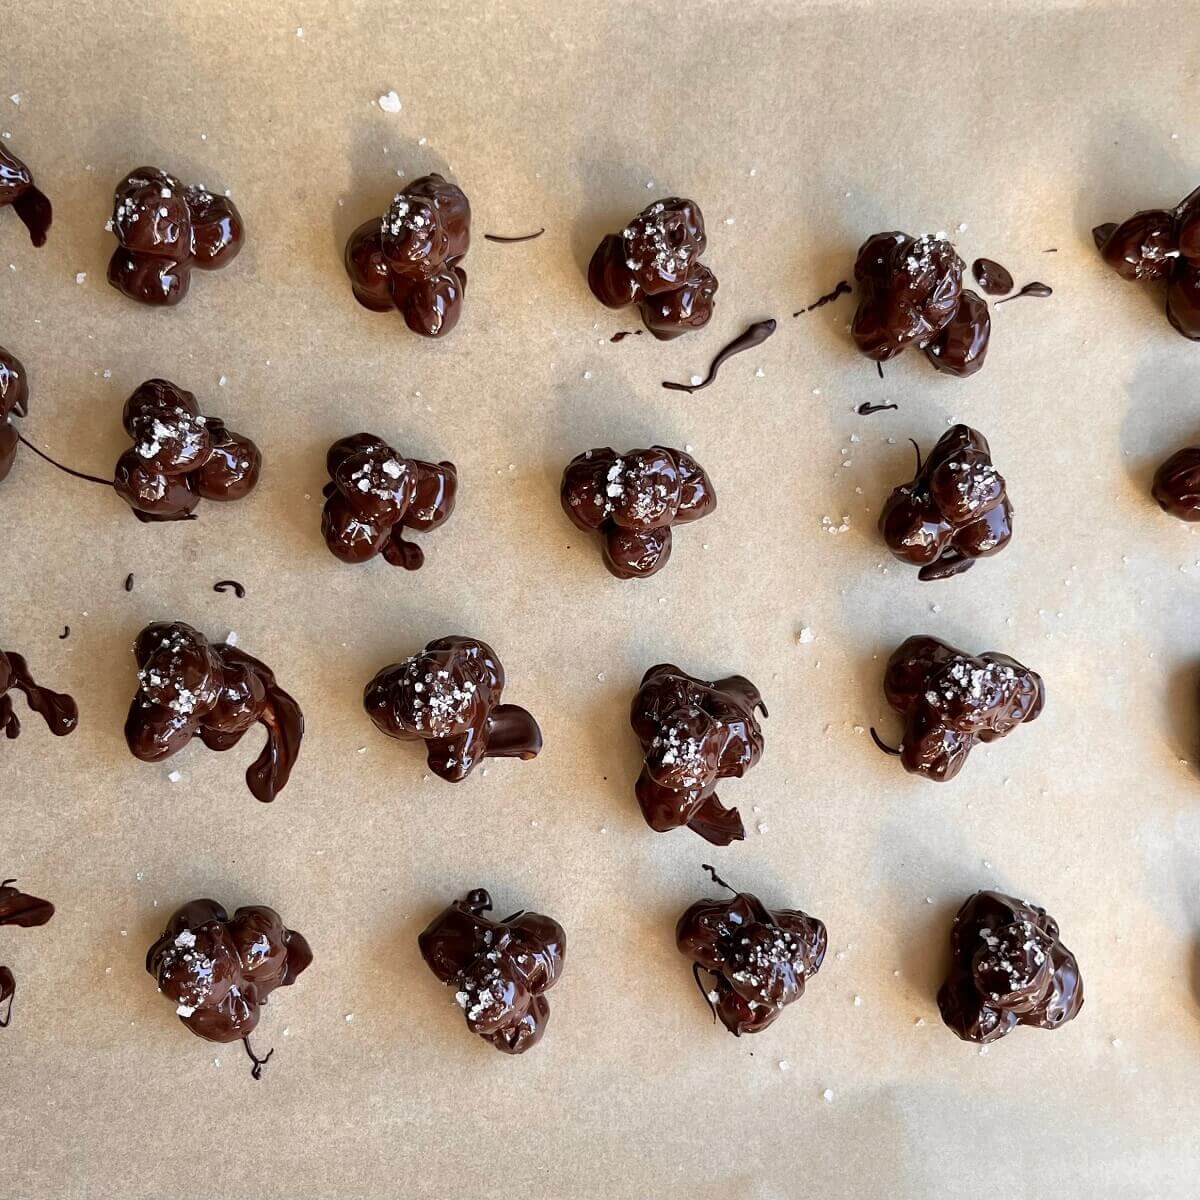 Hazelnut chocolate clusters on a sheet pan lined with parchment paper.